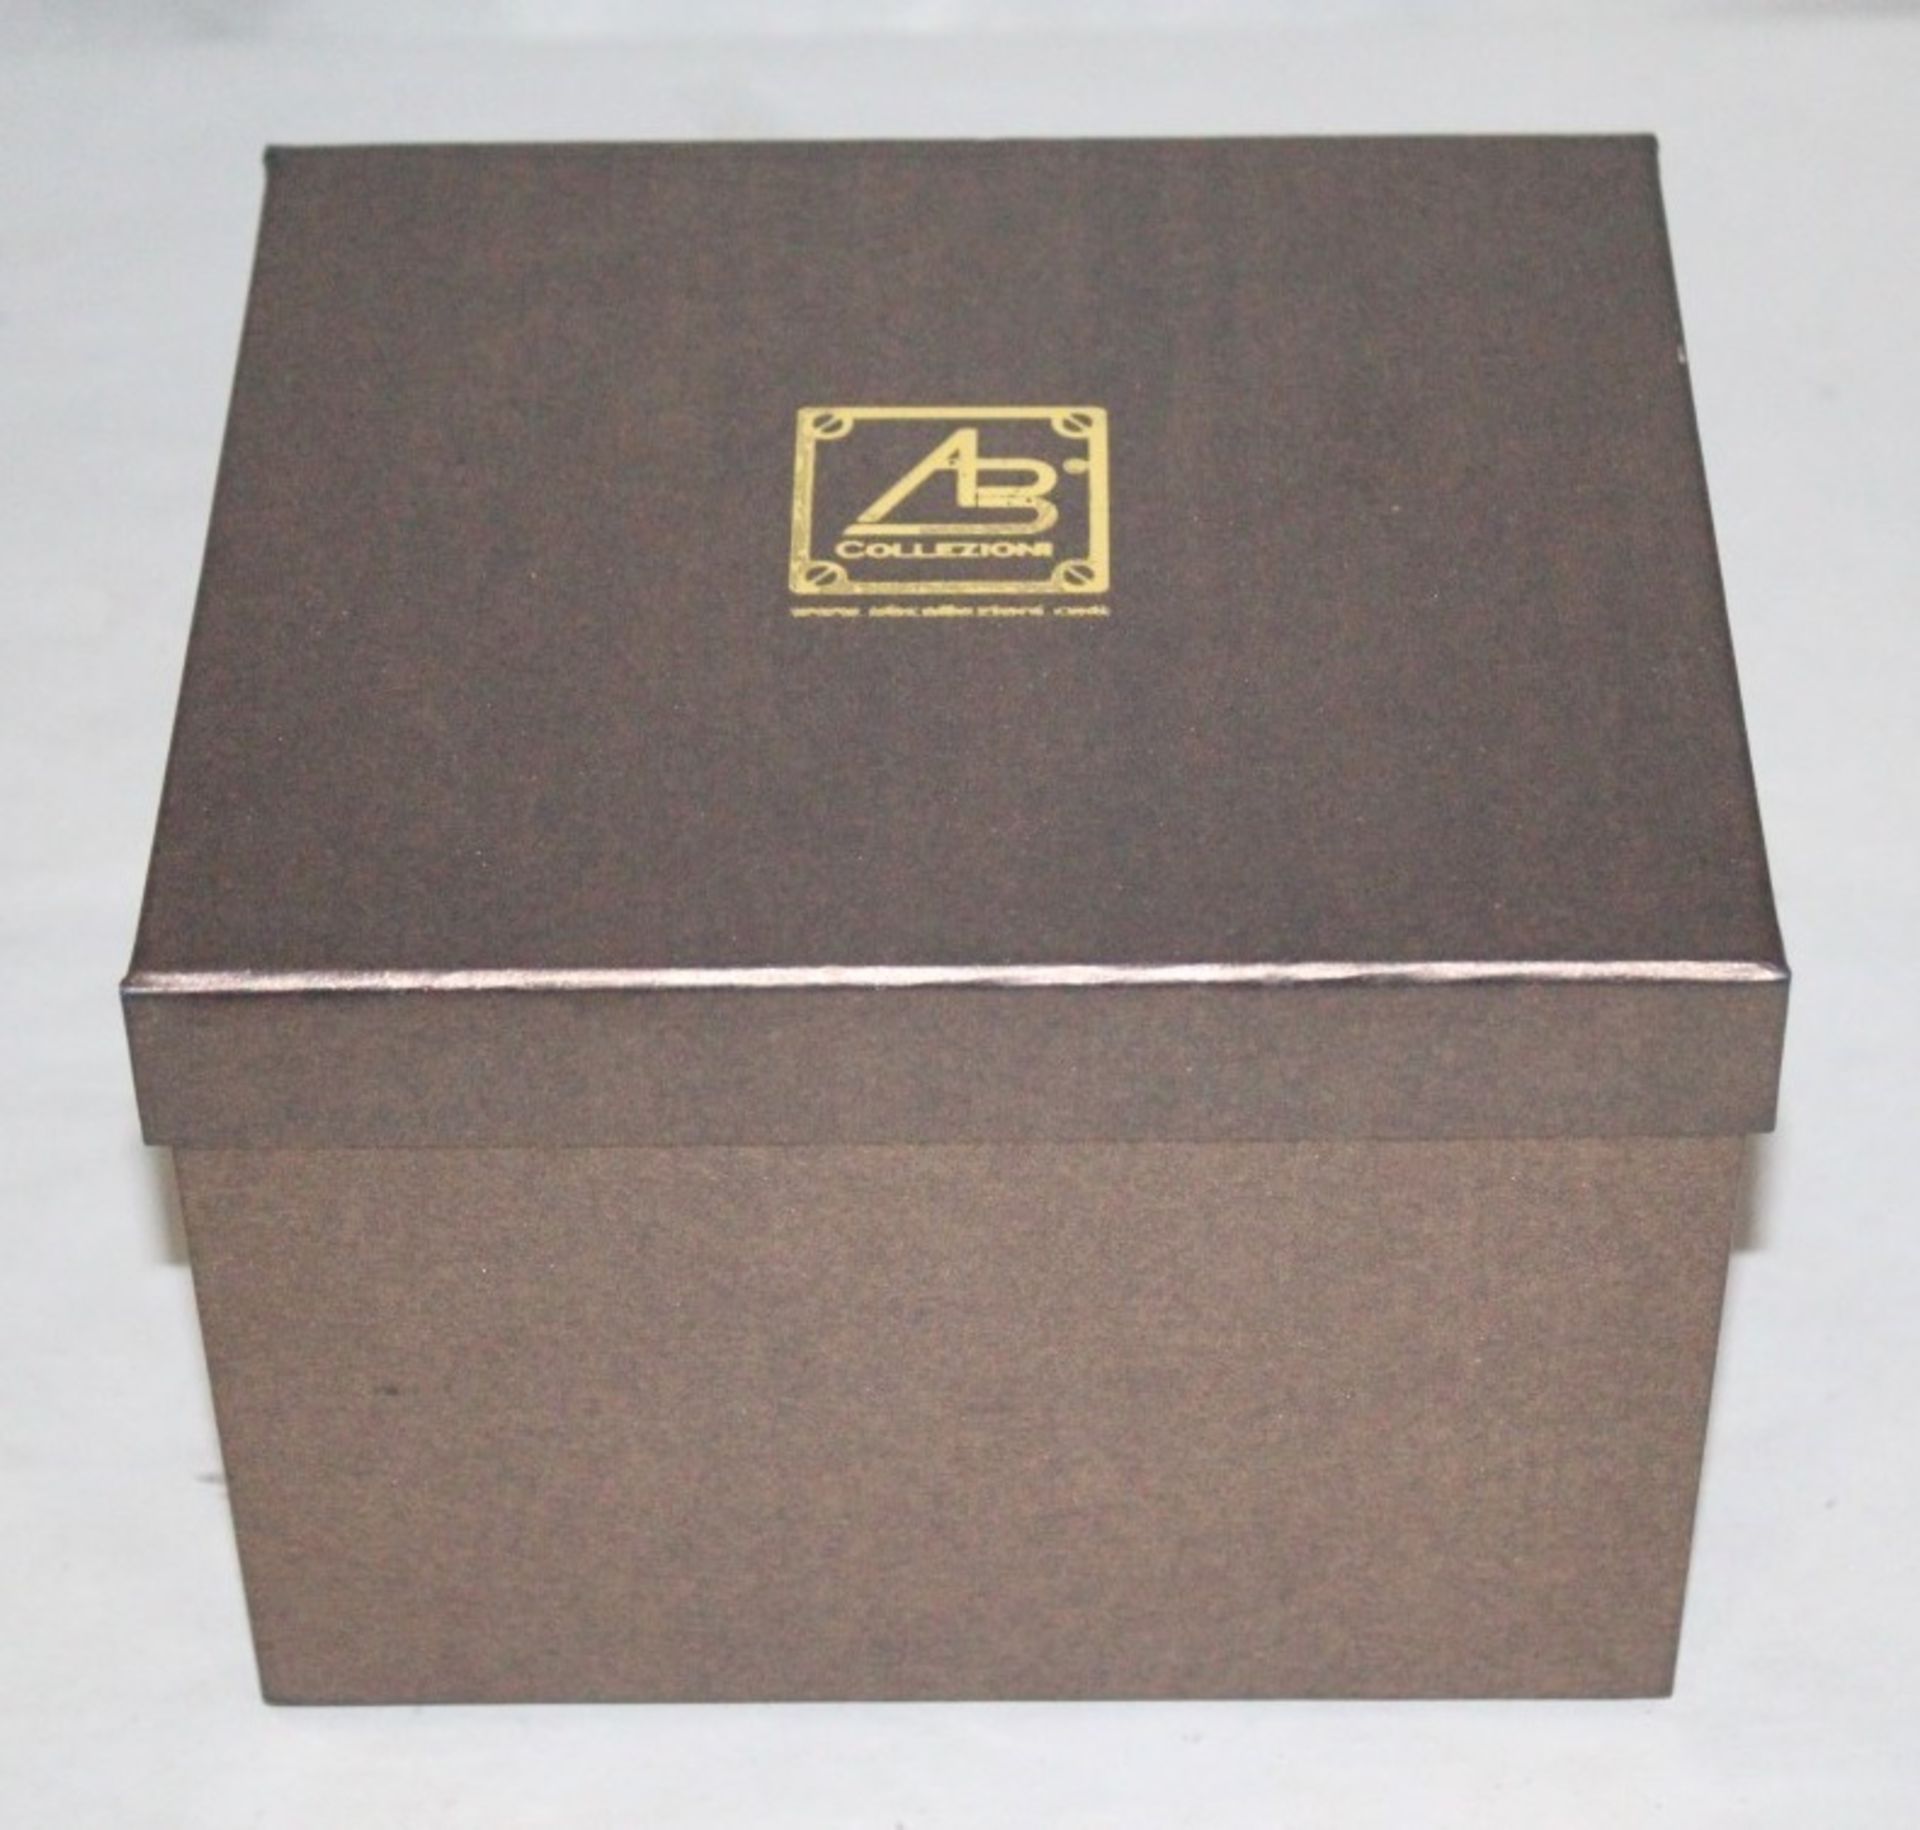 1 x "AB Collezioni" Italian Luxury Jewellery Box (33543) - Ref LT137  – Features A Pull-Out - Image 2 of 4